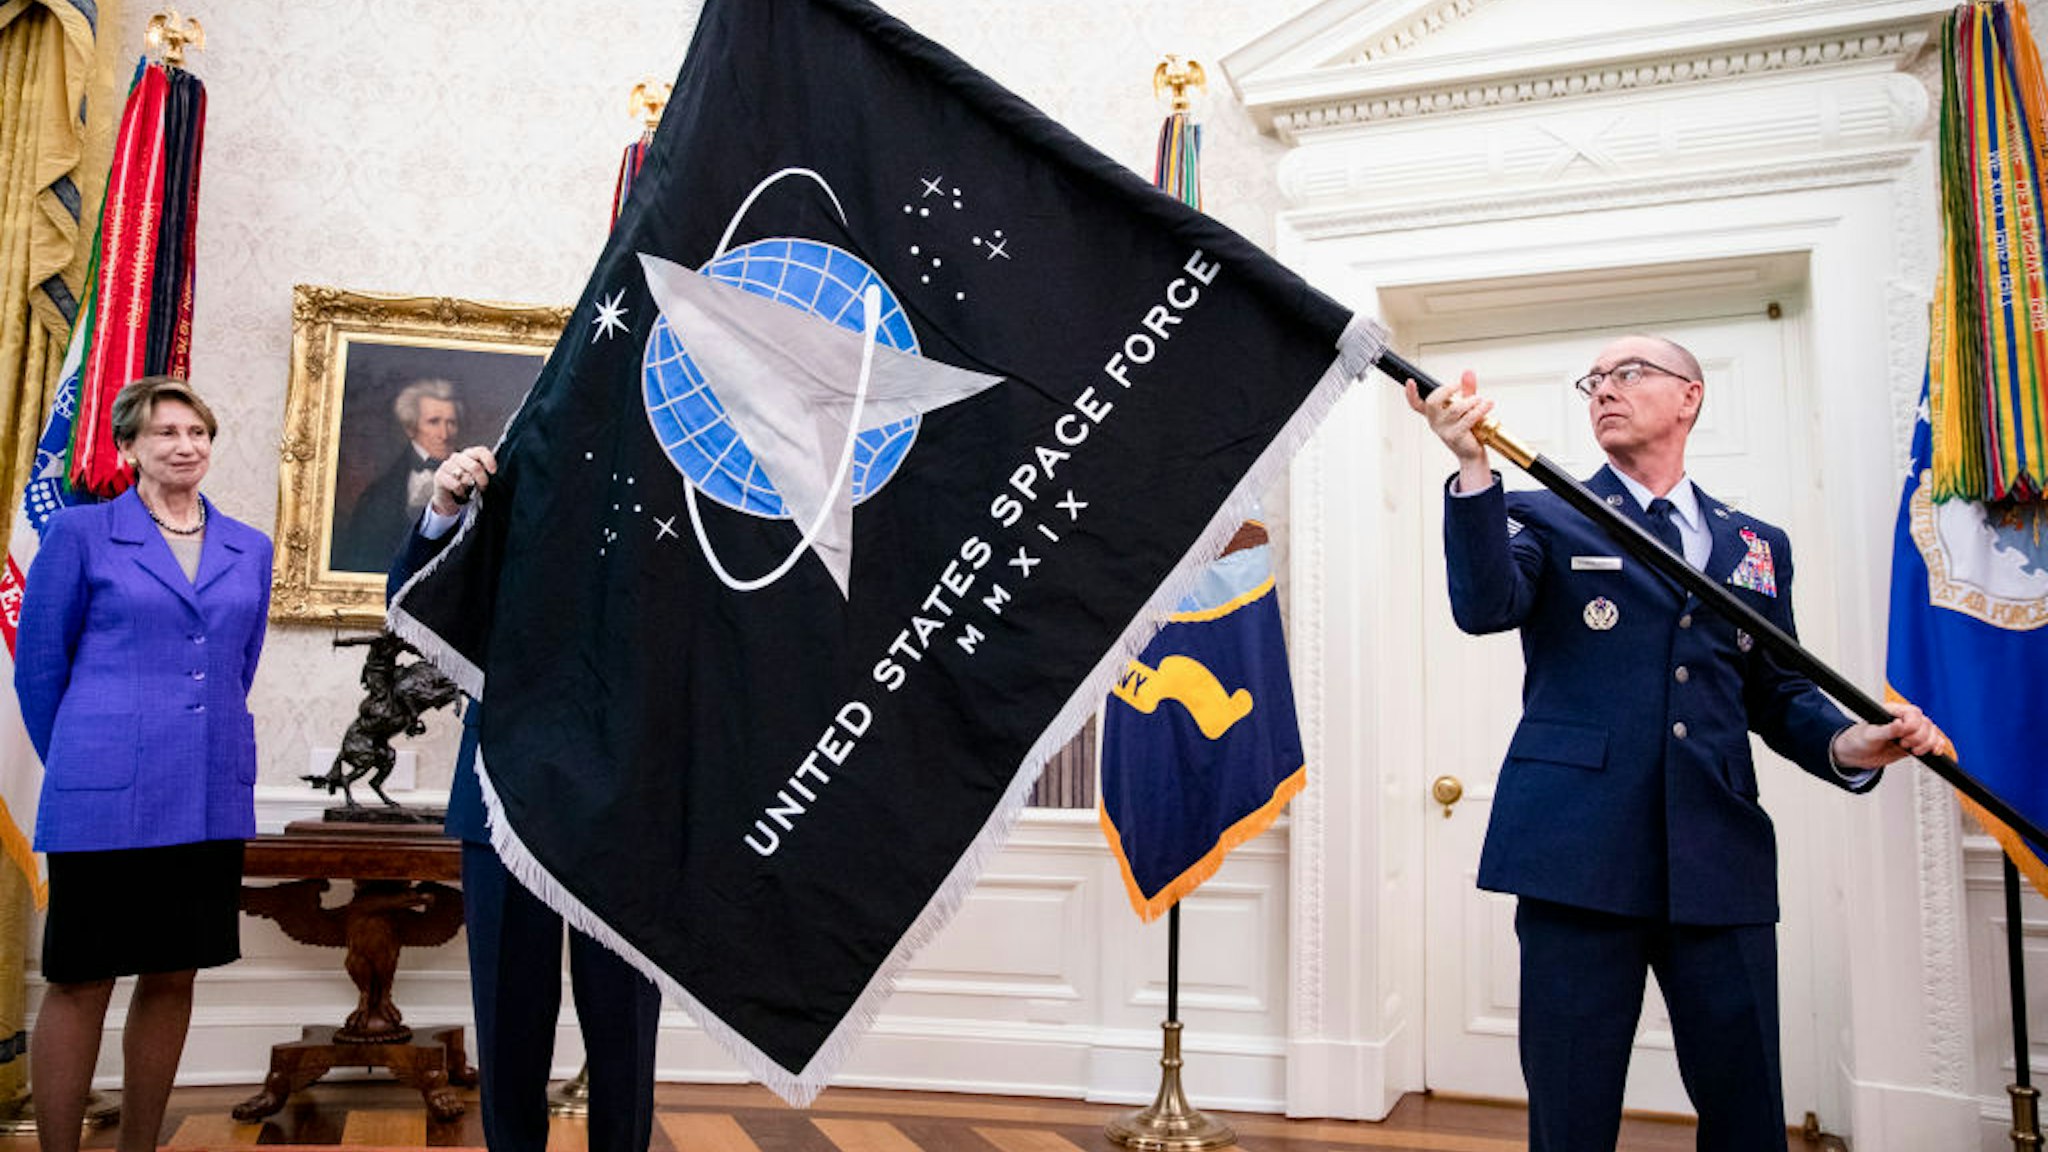 Gen. Jay Raymond (R), Chief of Space Operations, and CMSgt Roger Towberman (L), with Secretary of the Air Force Barbara Barrett present US President Donald Trump with the official flag of the United States Space Force in the Oval Office of the White House in Washington, DC on May 15, 2020.